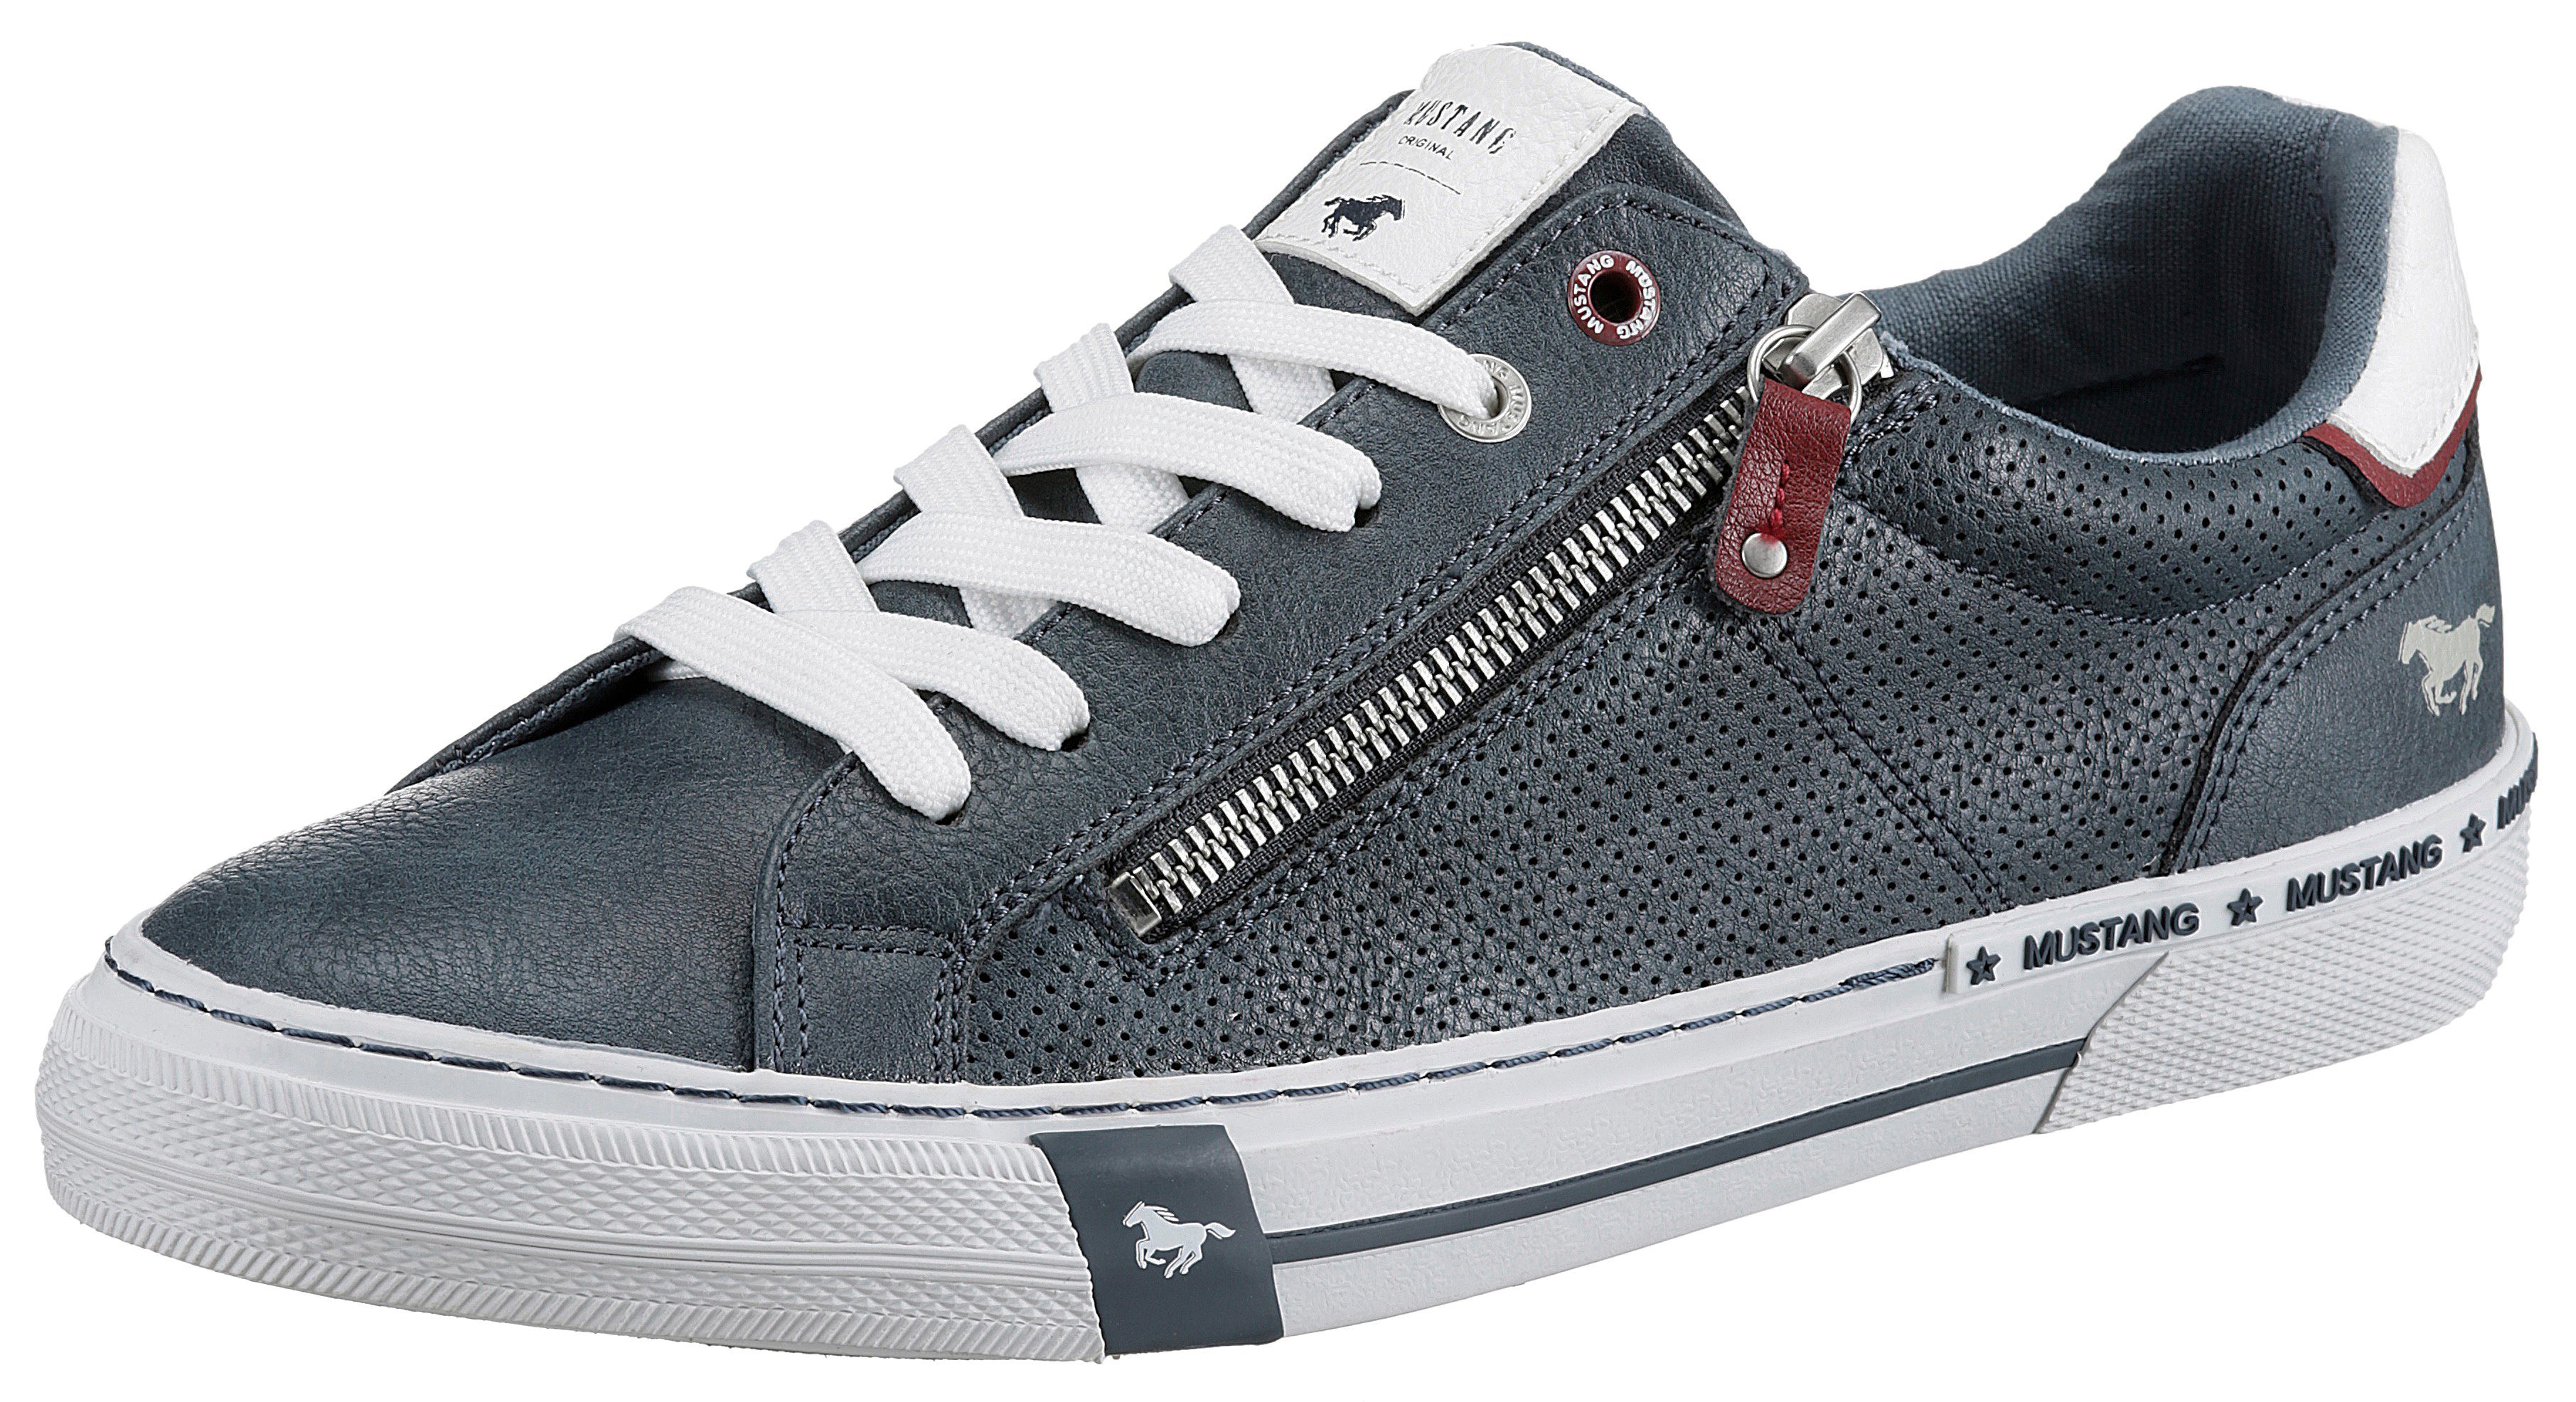 Mustang Shoes Sneaker mit Perforation jeansblau